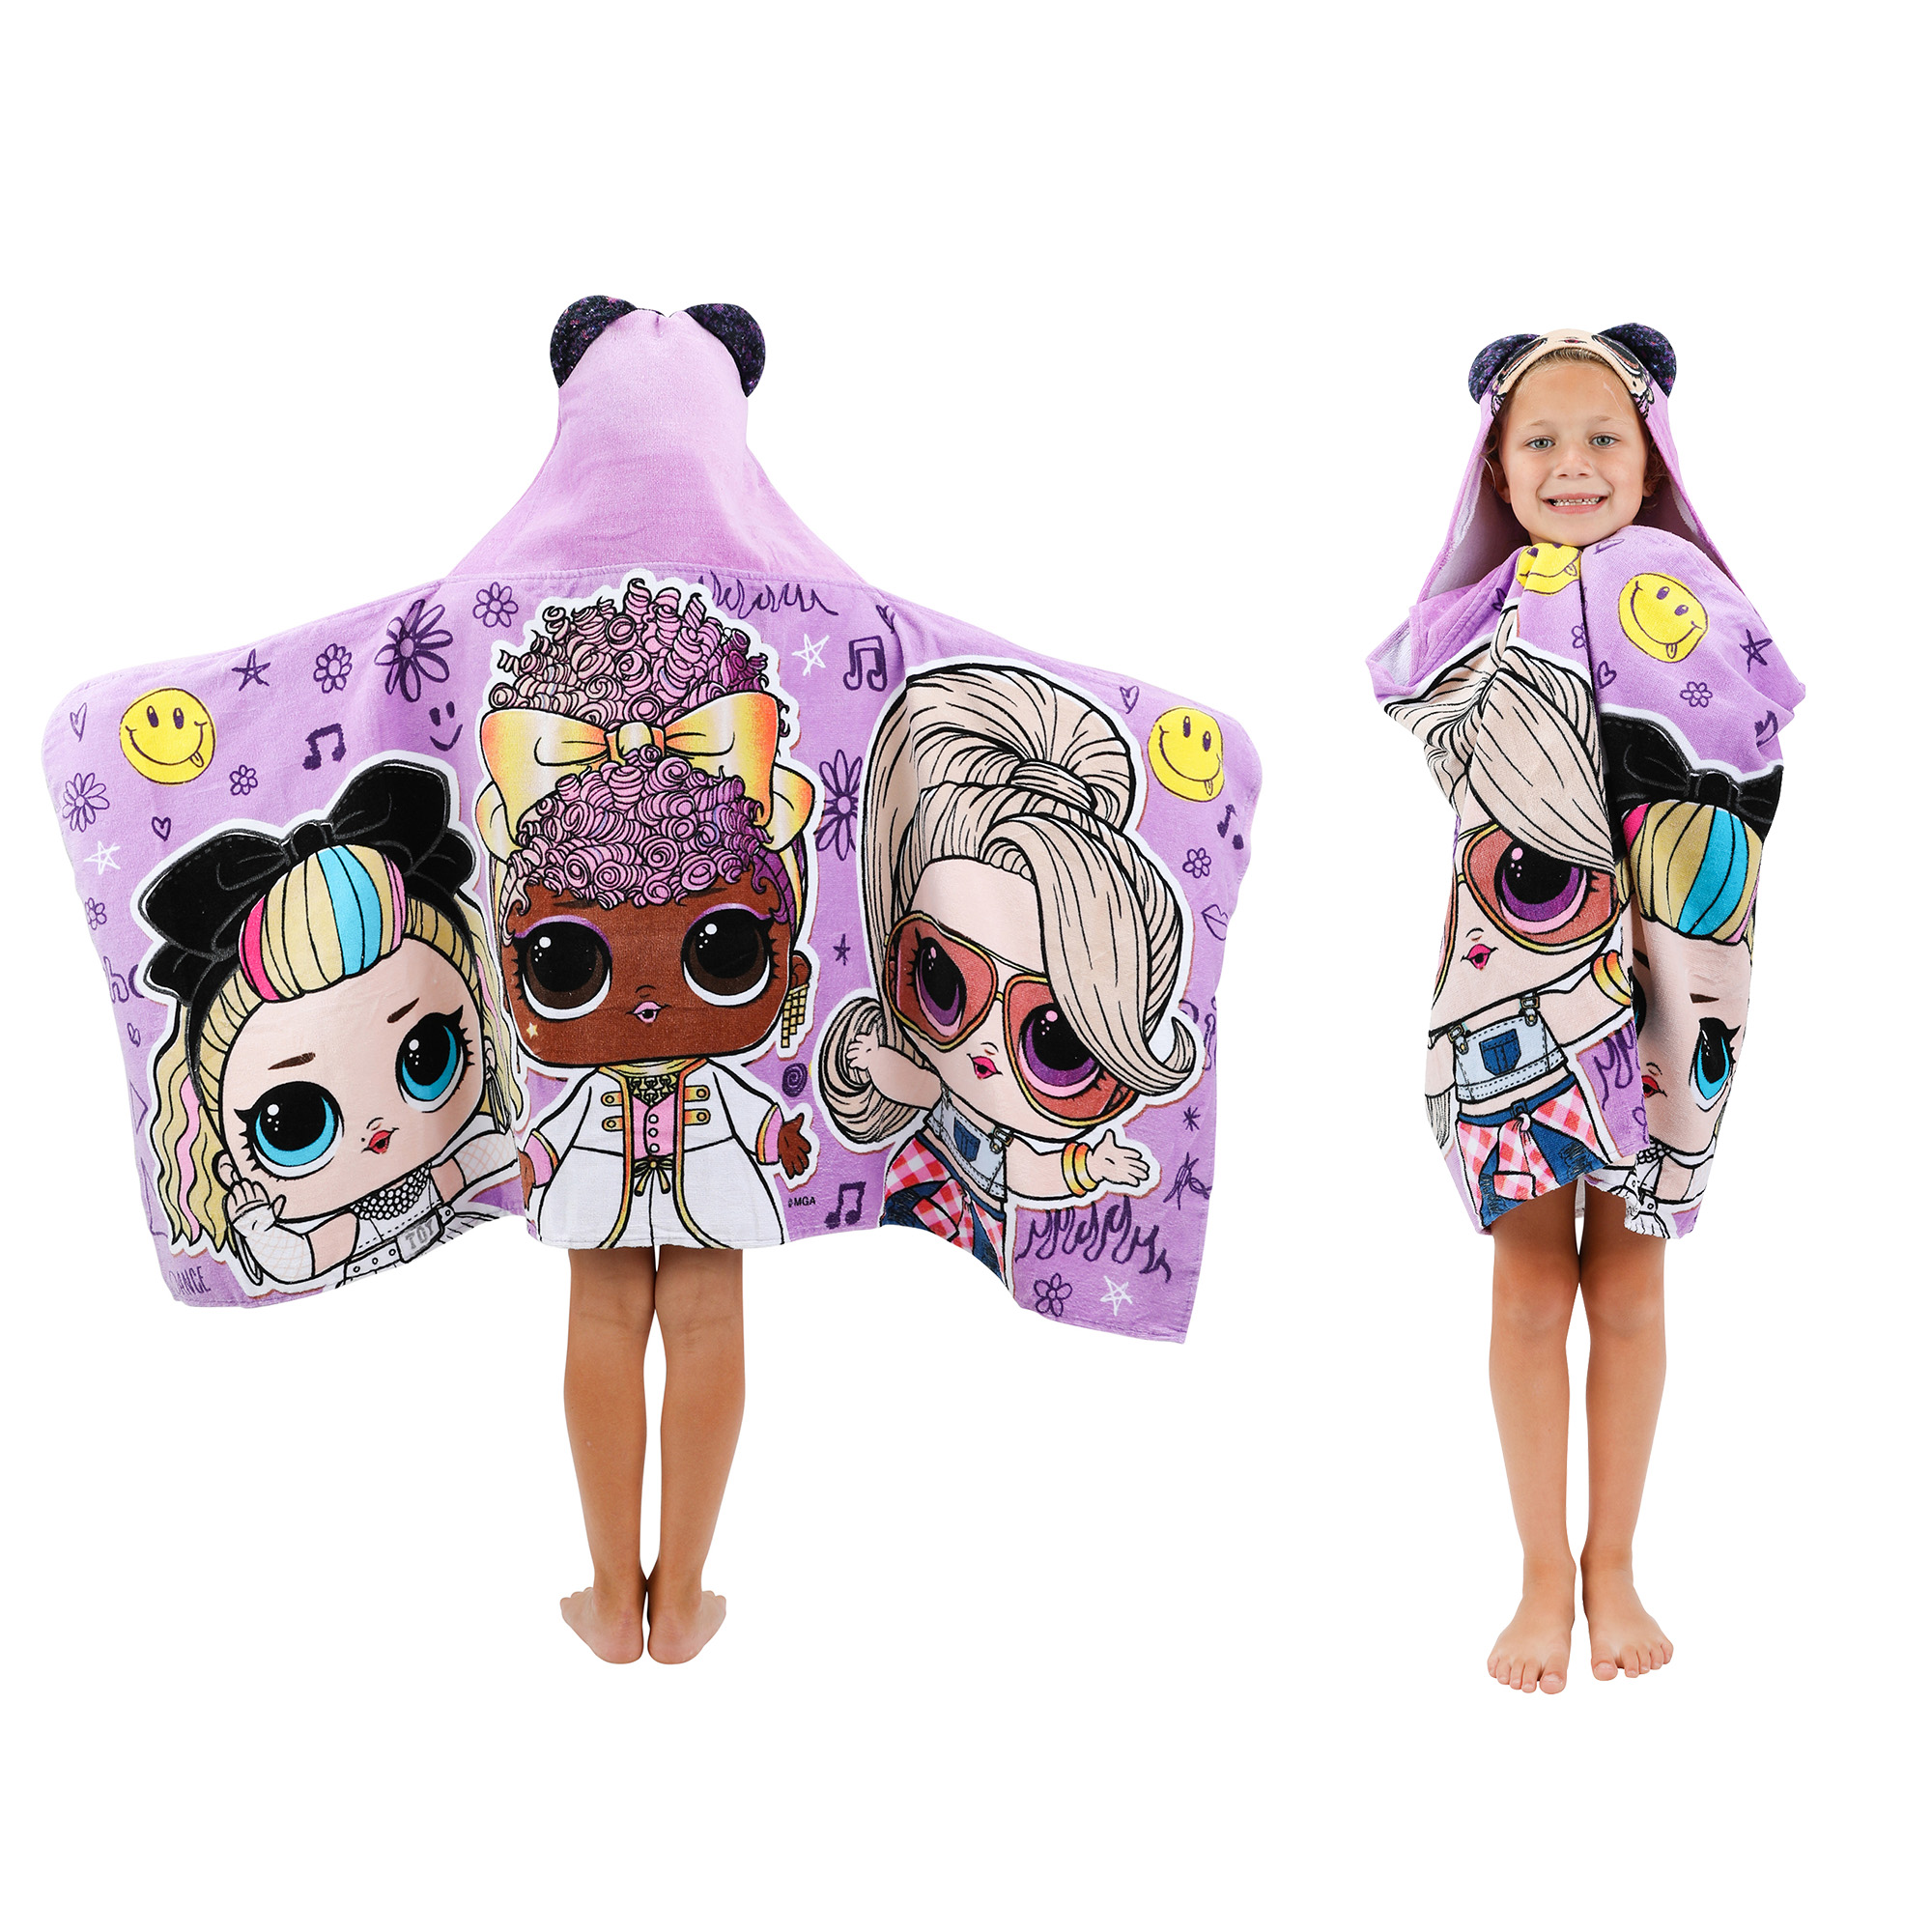 LOL Surprise Kids Purple Queen Hooded Towel, Cotton, Purple, MGA - image 3 of 10